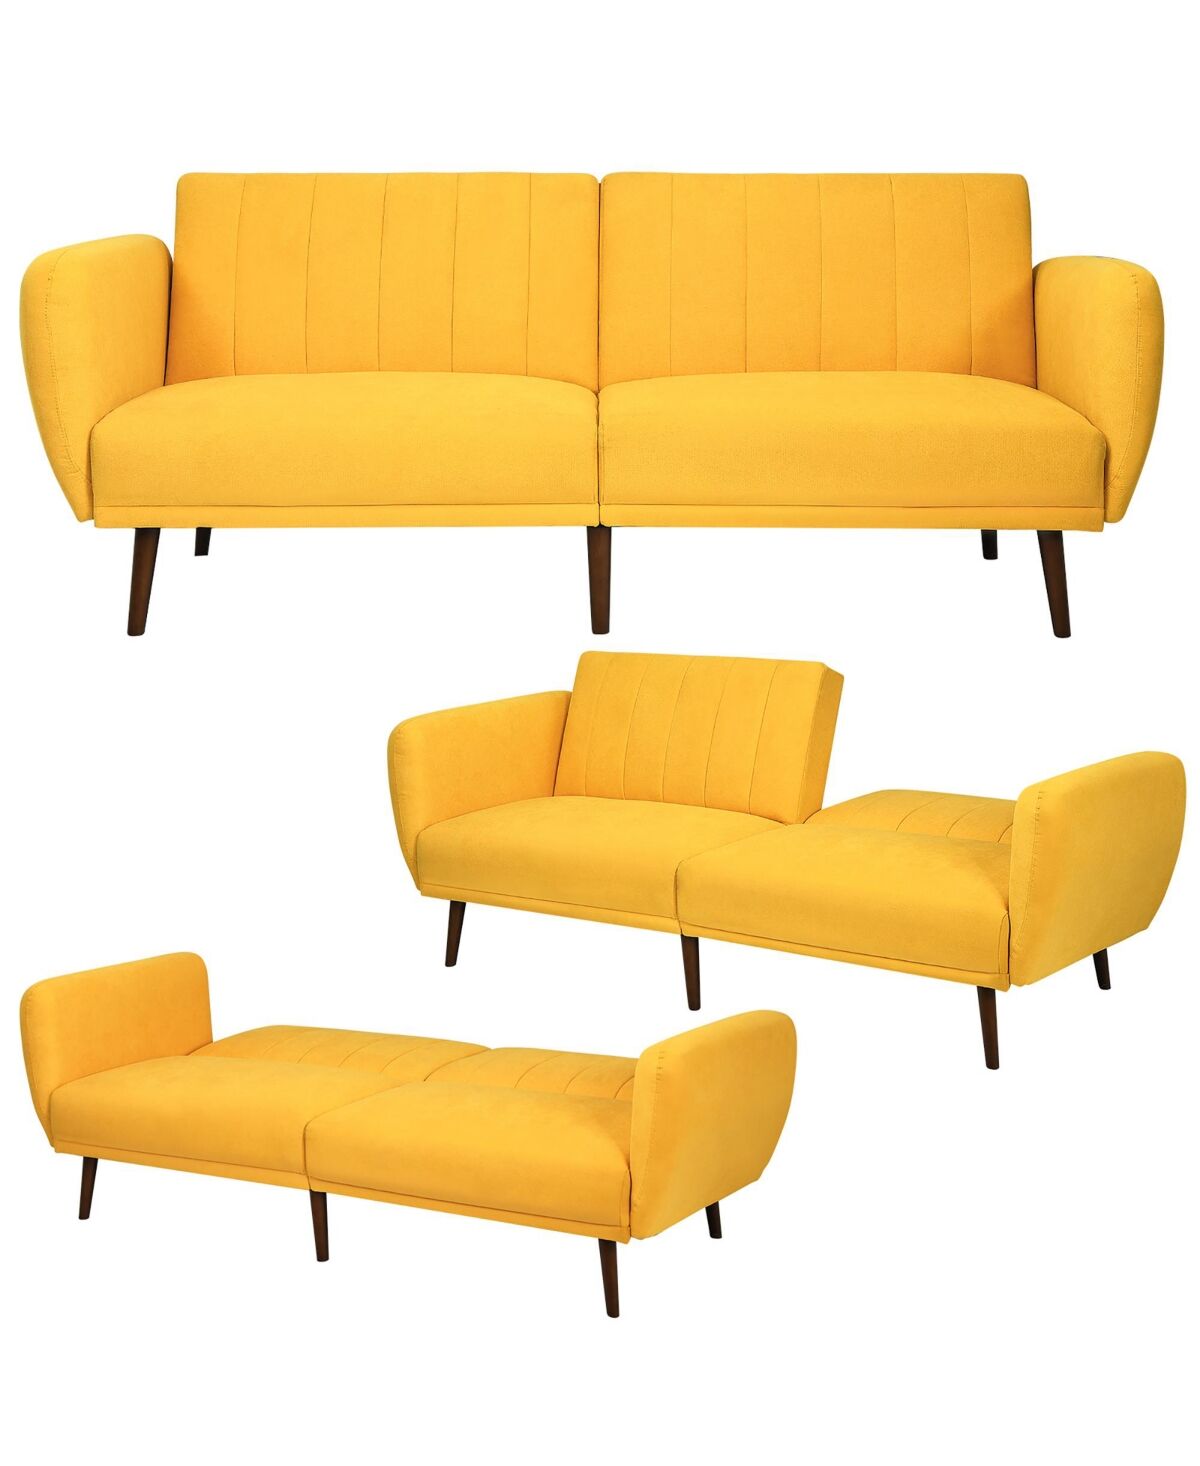 Costway Convertible Futon Sofa Bed Adjustable Couch Sleeper - Yellow